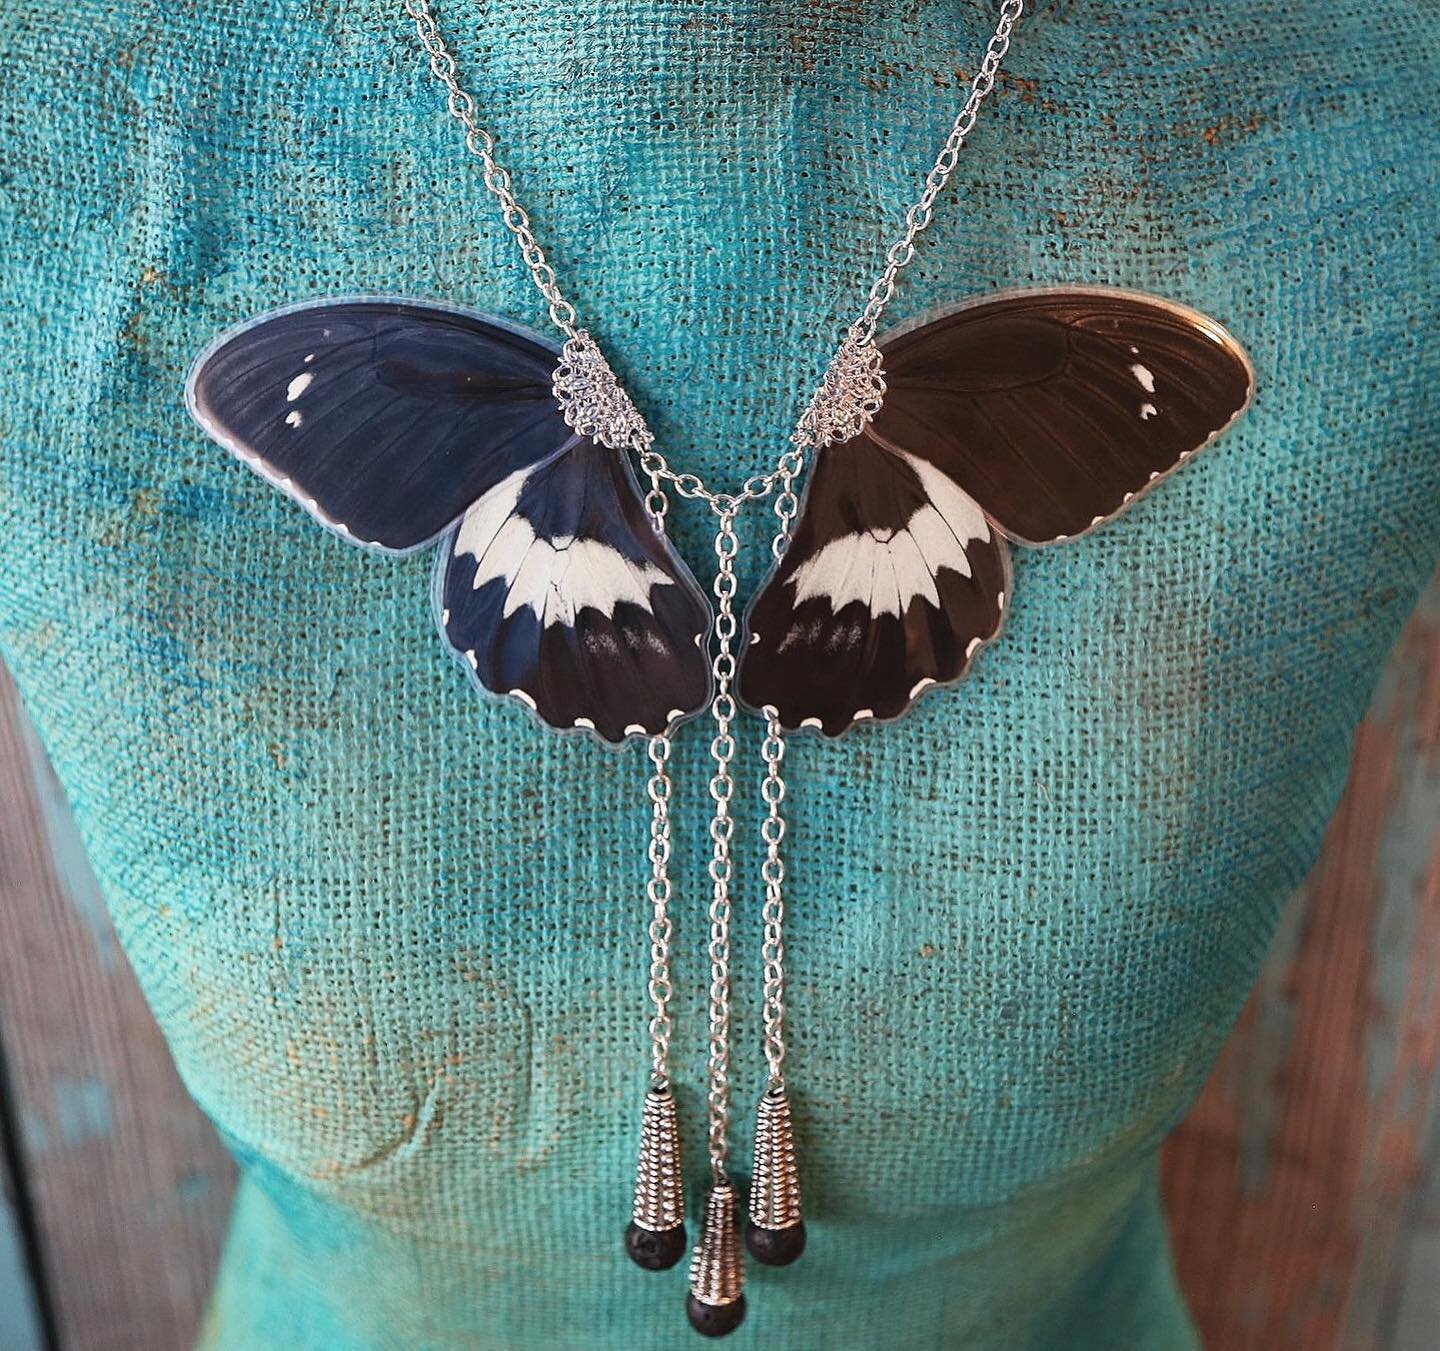 &ldquo;Life is a series of natural and spontaneous changes.&rdquo; - Lao Tzu 
Forrest Giant Butterfly (Papilio gambrisius)
🖤
#wearableart
#entomology 
#naturalhistory